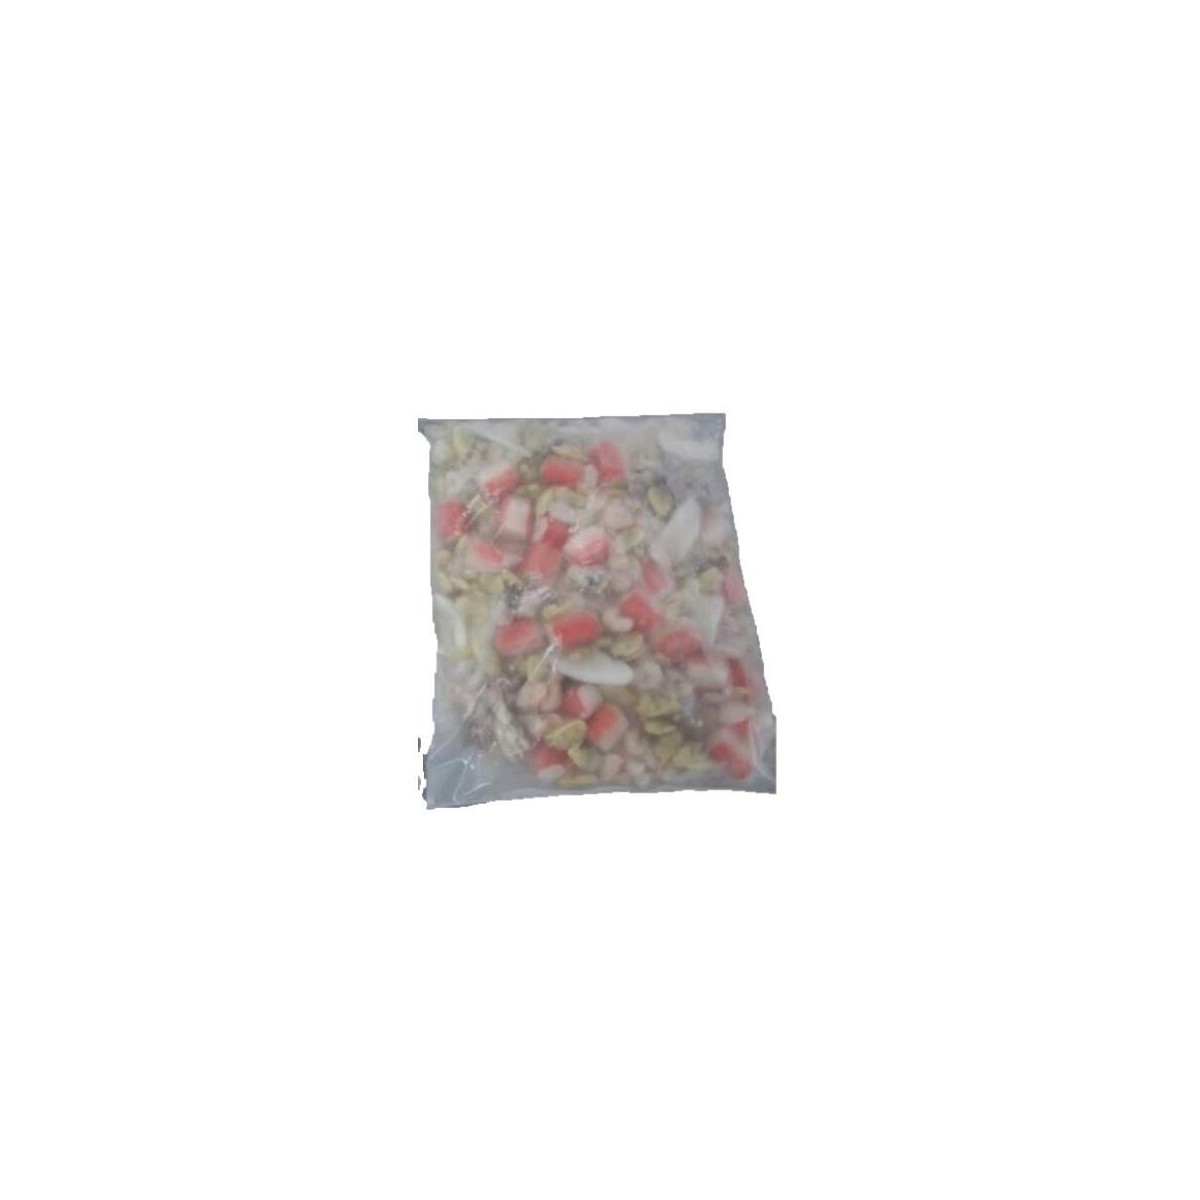 SEACON SEAFOOD MIX 1KG  netto 0.8kg